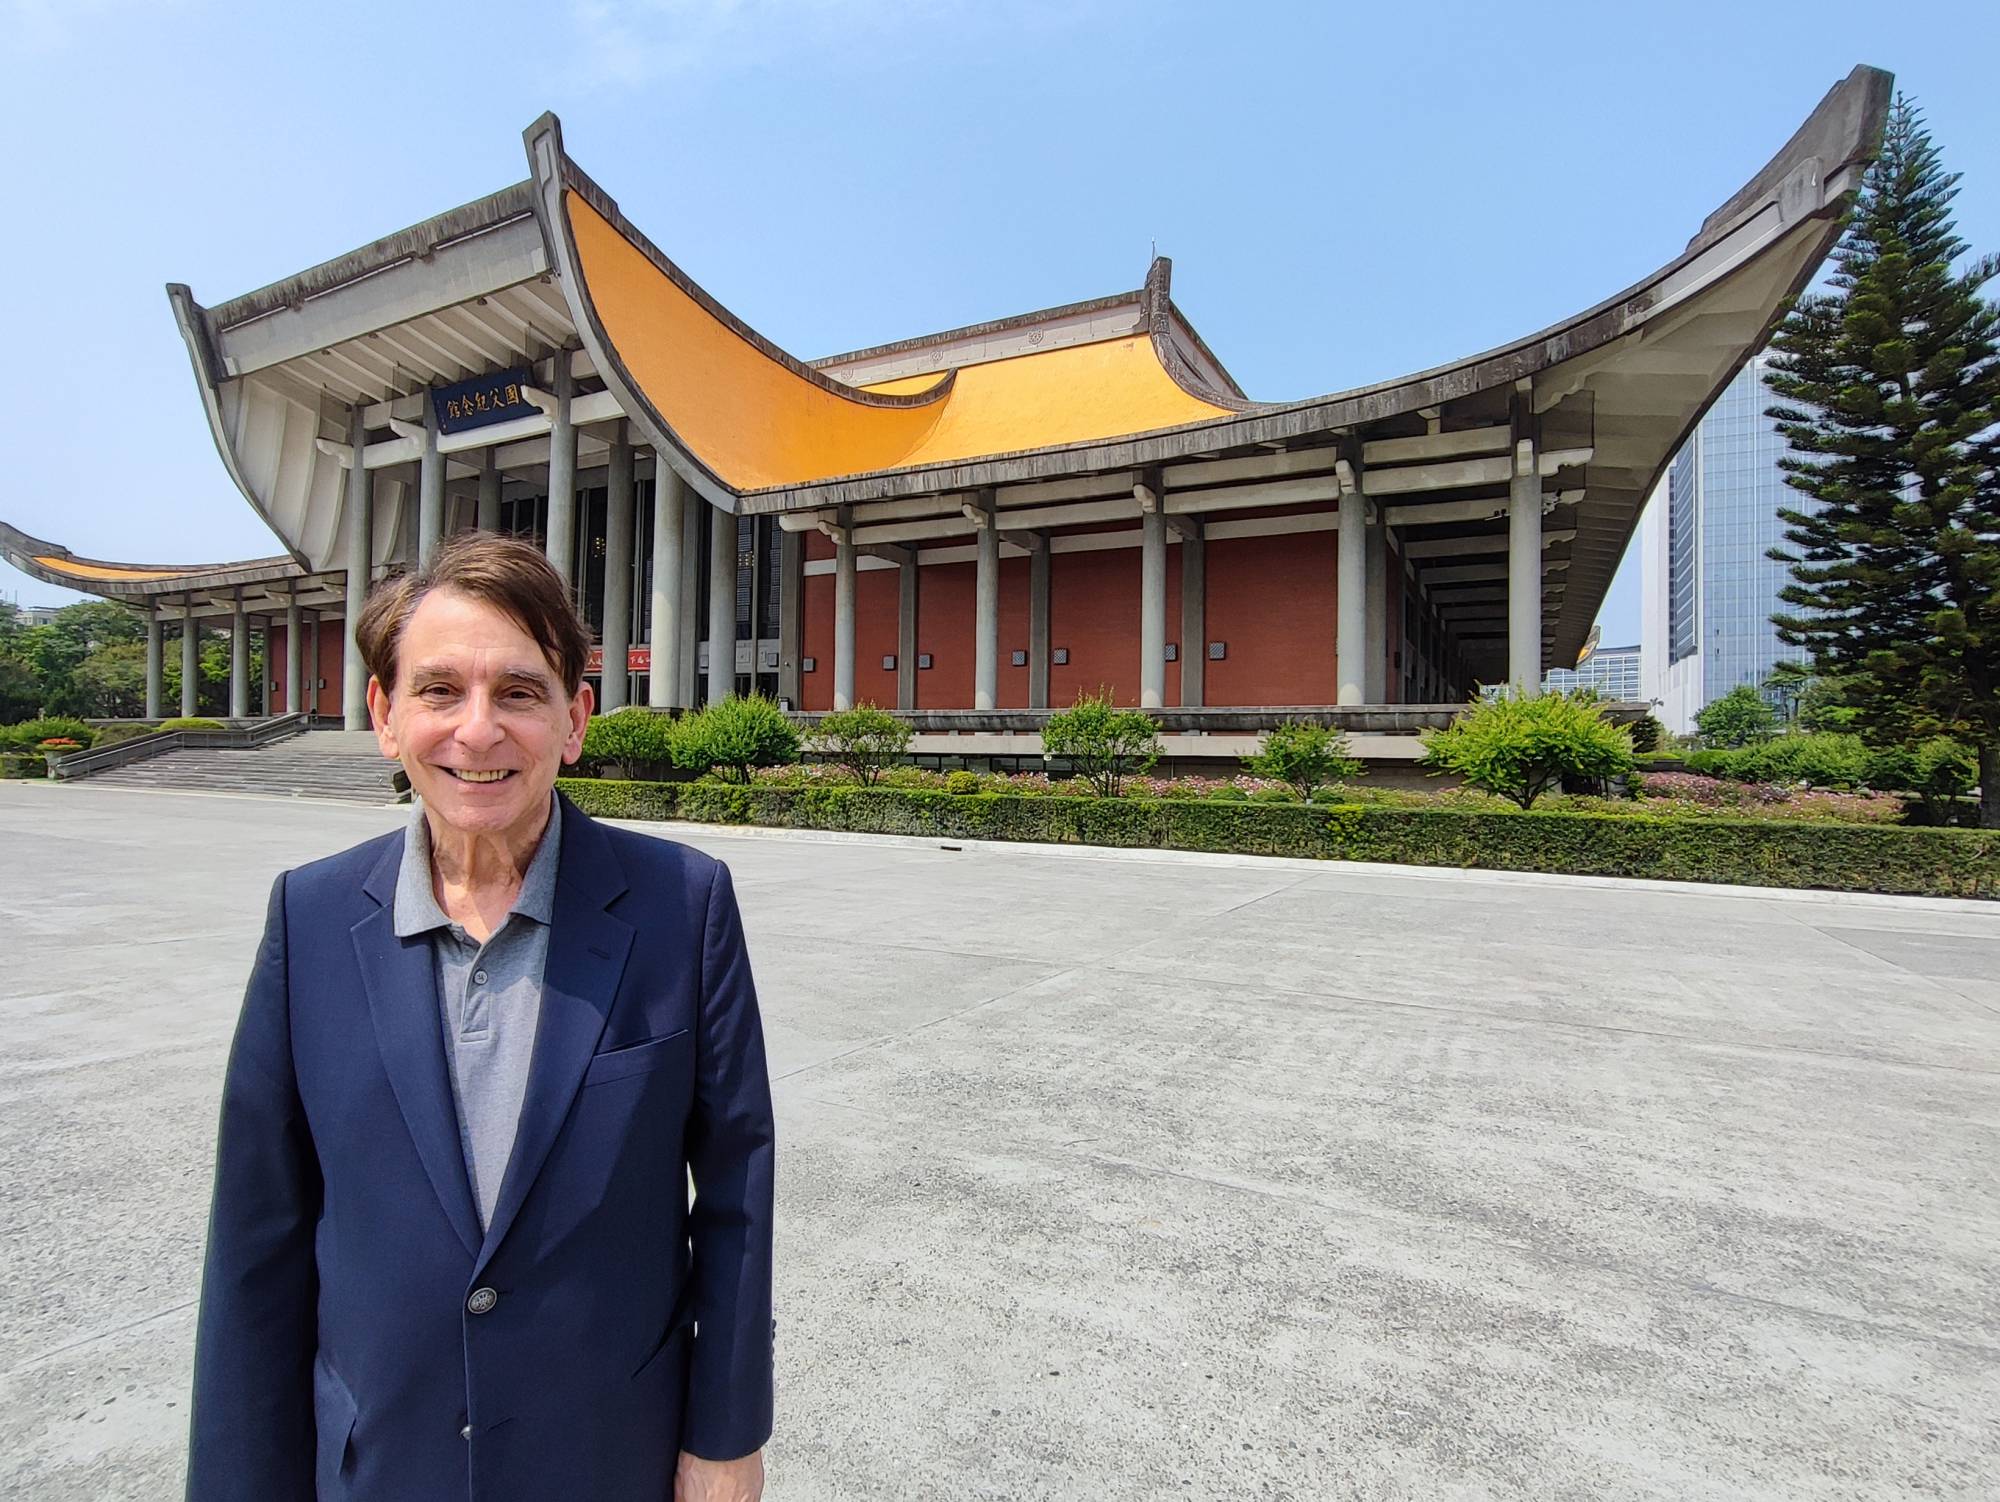 William Stanton, former director of the American Institute in Taiwan (AIT), the de facto U.S. embassy in Taiwan, stands in front of the Sun Yat-Sen Memorial Hall in Taipei during an interview earlier this month.  | GABRIEL DOMINGUEZ